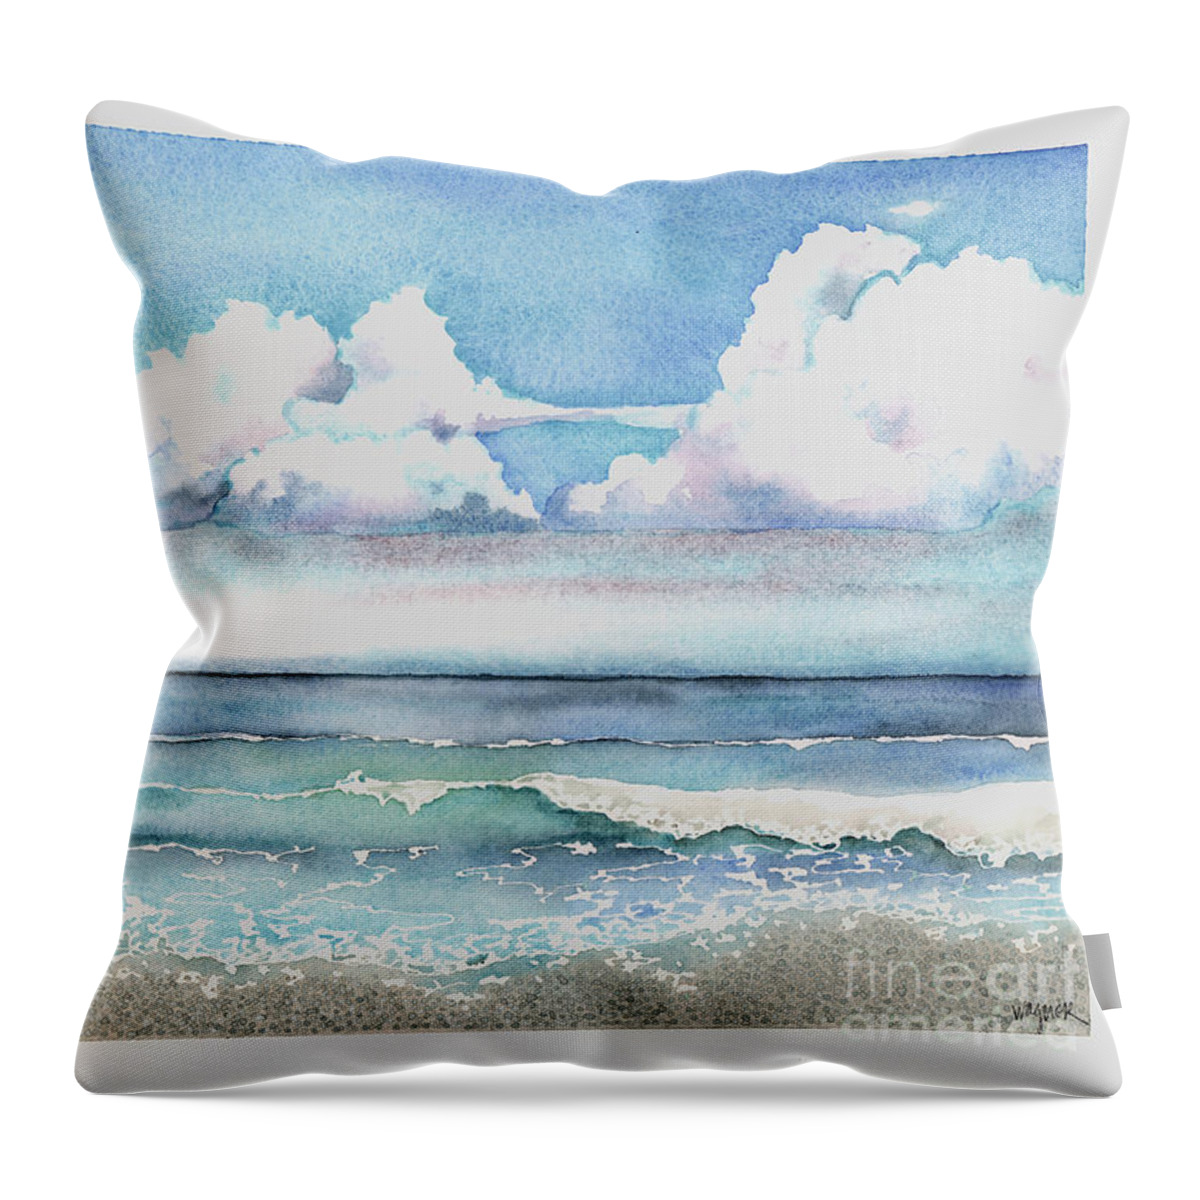 Clouds Throw Pillow featuring the painting Cloudburst by Hilda Wagner